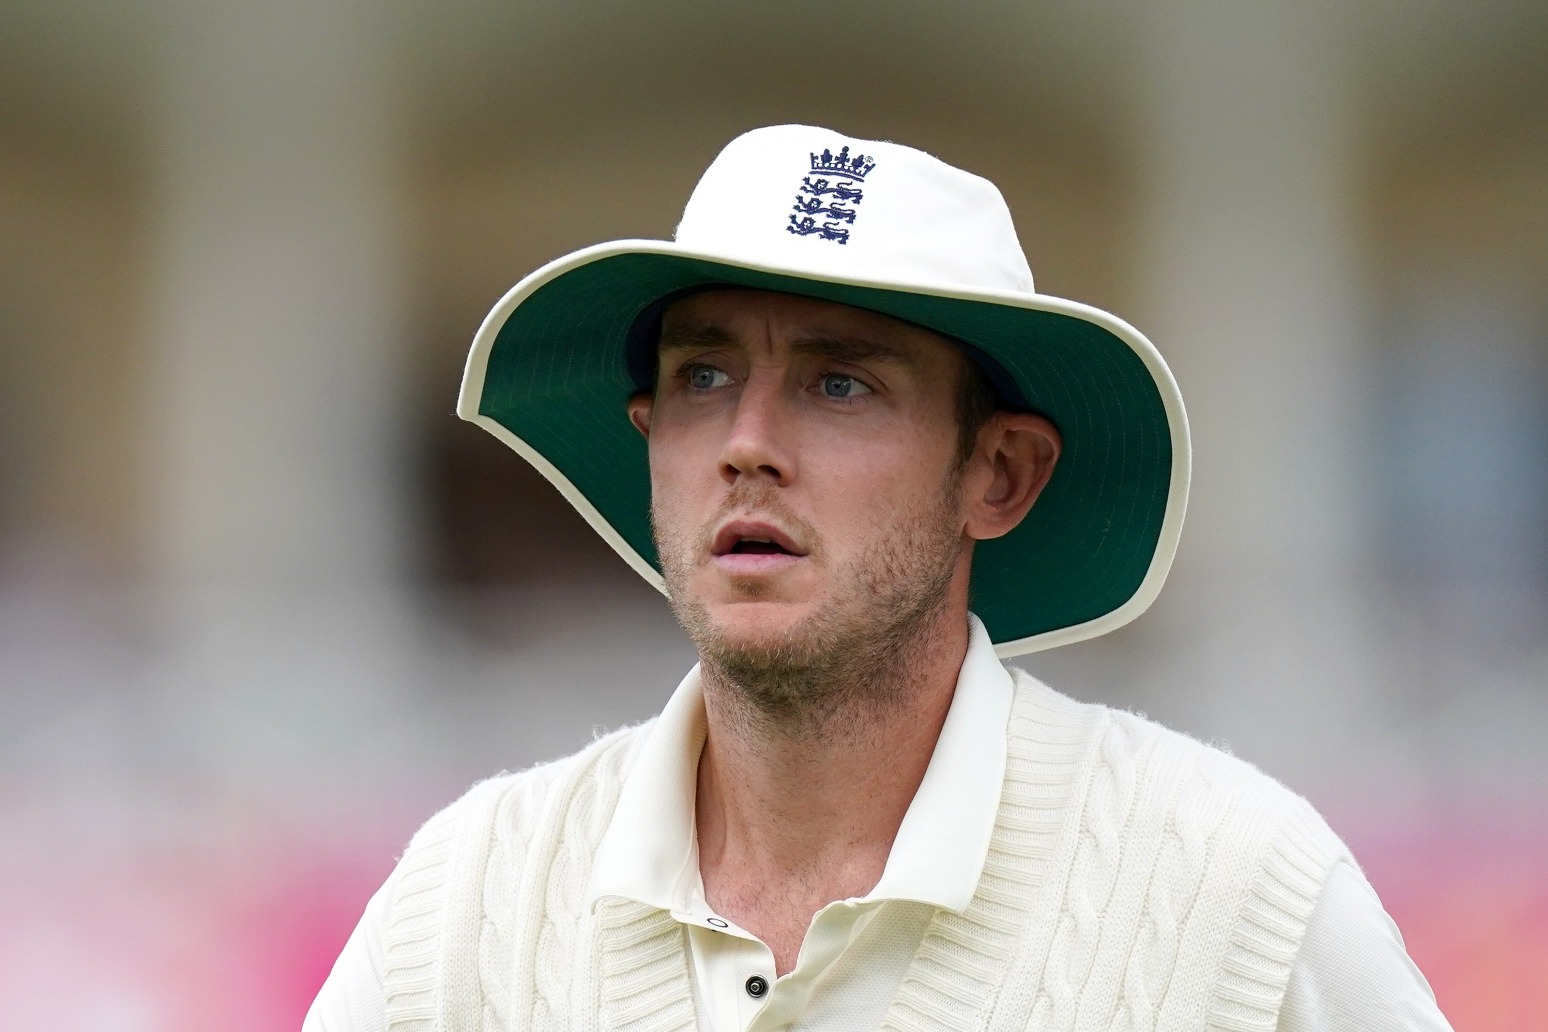 Stuart Broad: I could have had a positive influence in the first Test 